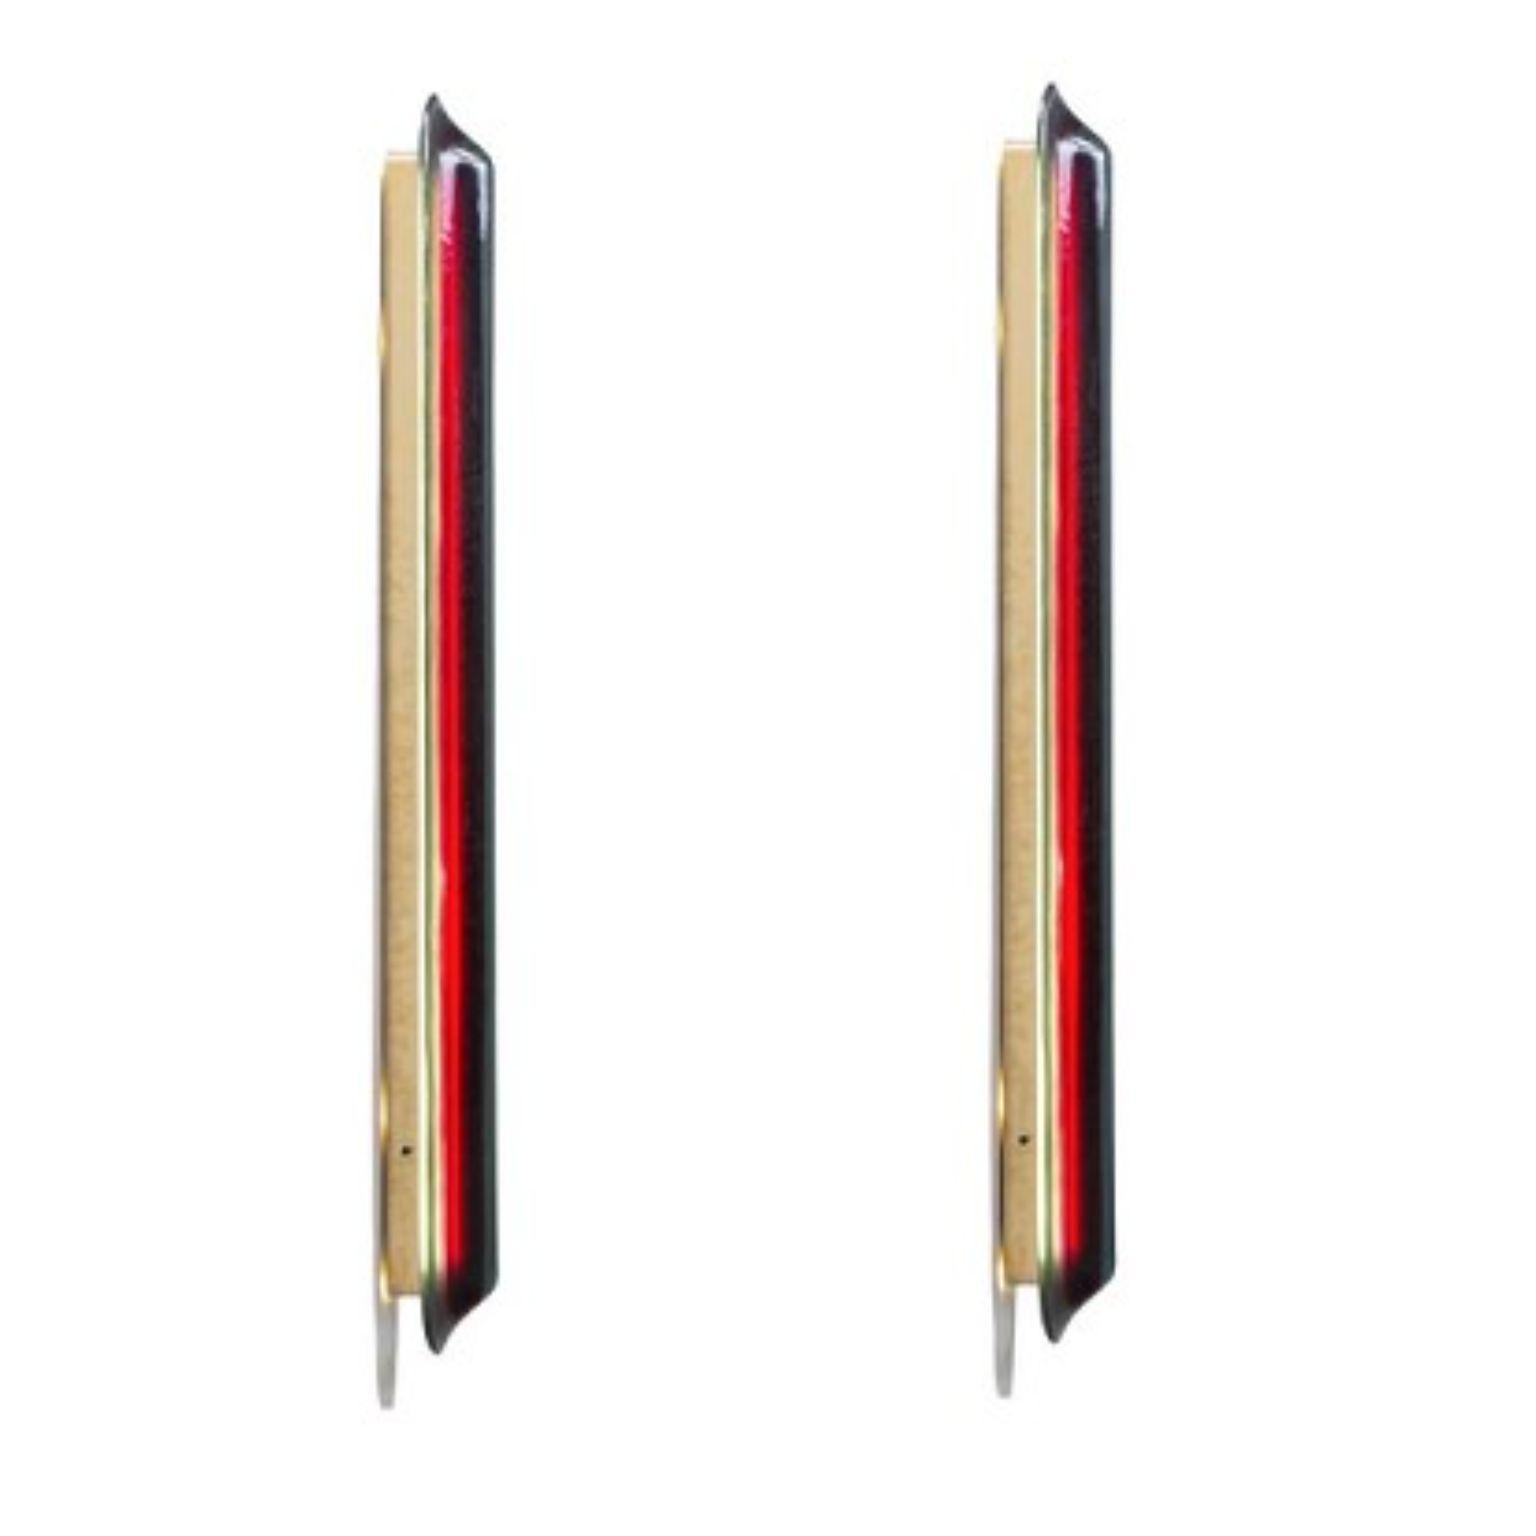 Set of 2 Joy tall wall lamps by Draga & Aurel
Dimensions: W 20, D 13, H 160
Materials: Resin and brass

All our lamps can be wired according to each country. If sold to the USA it will be wired for the USA for instance.

These organic light